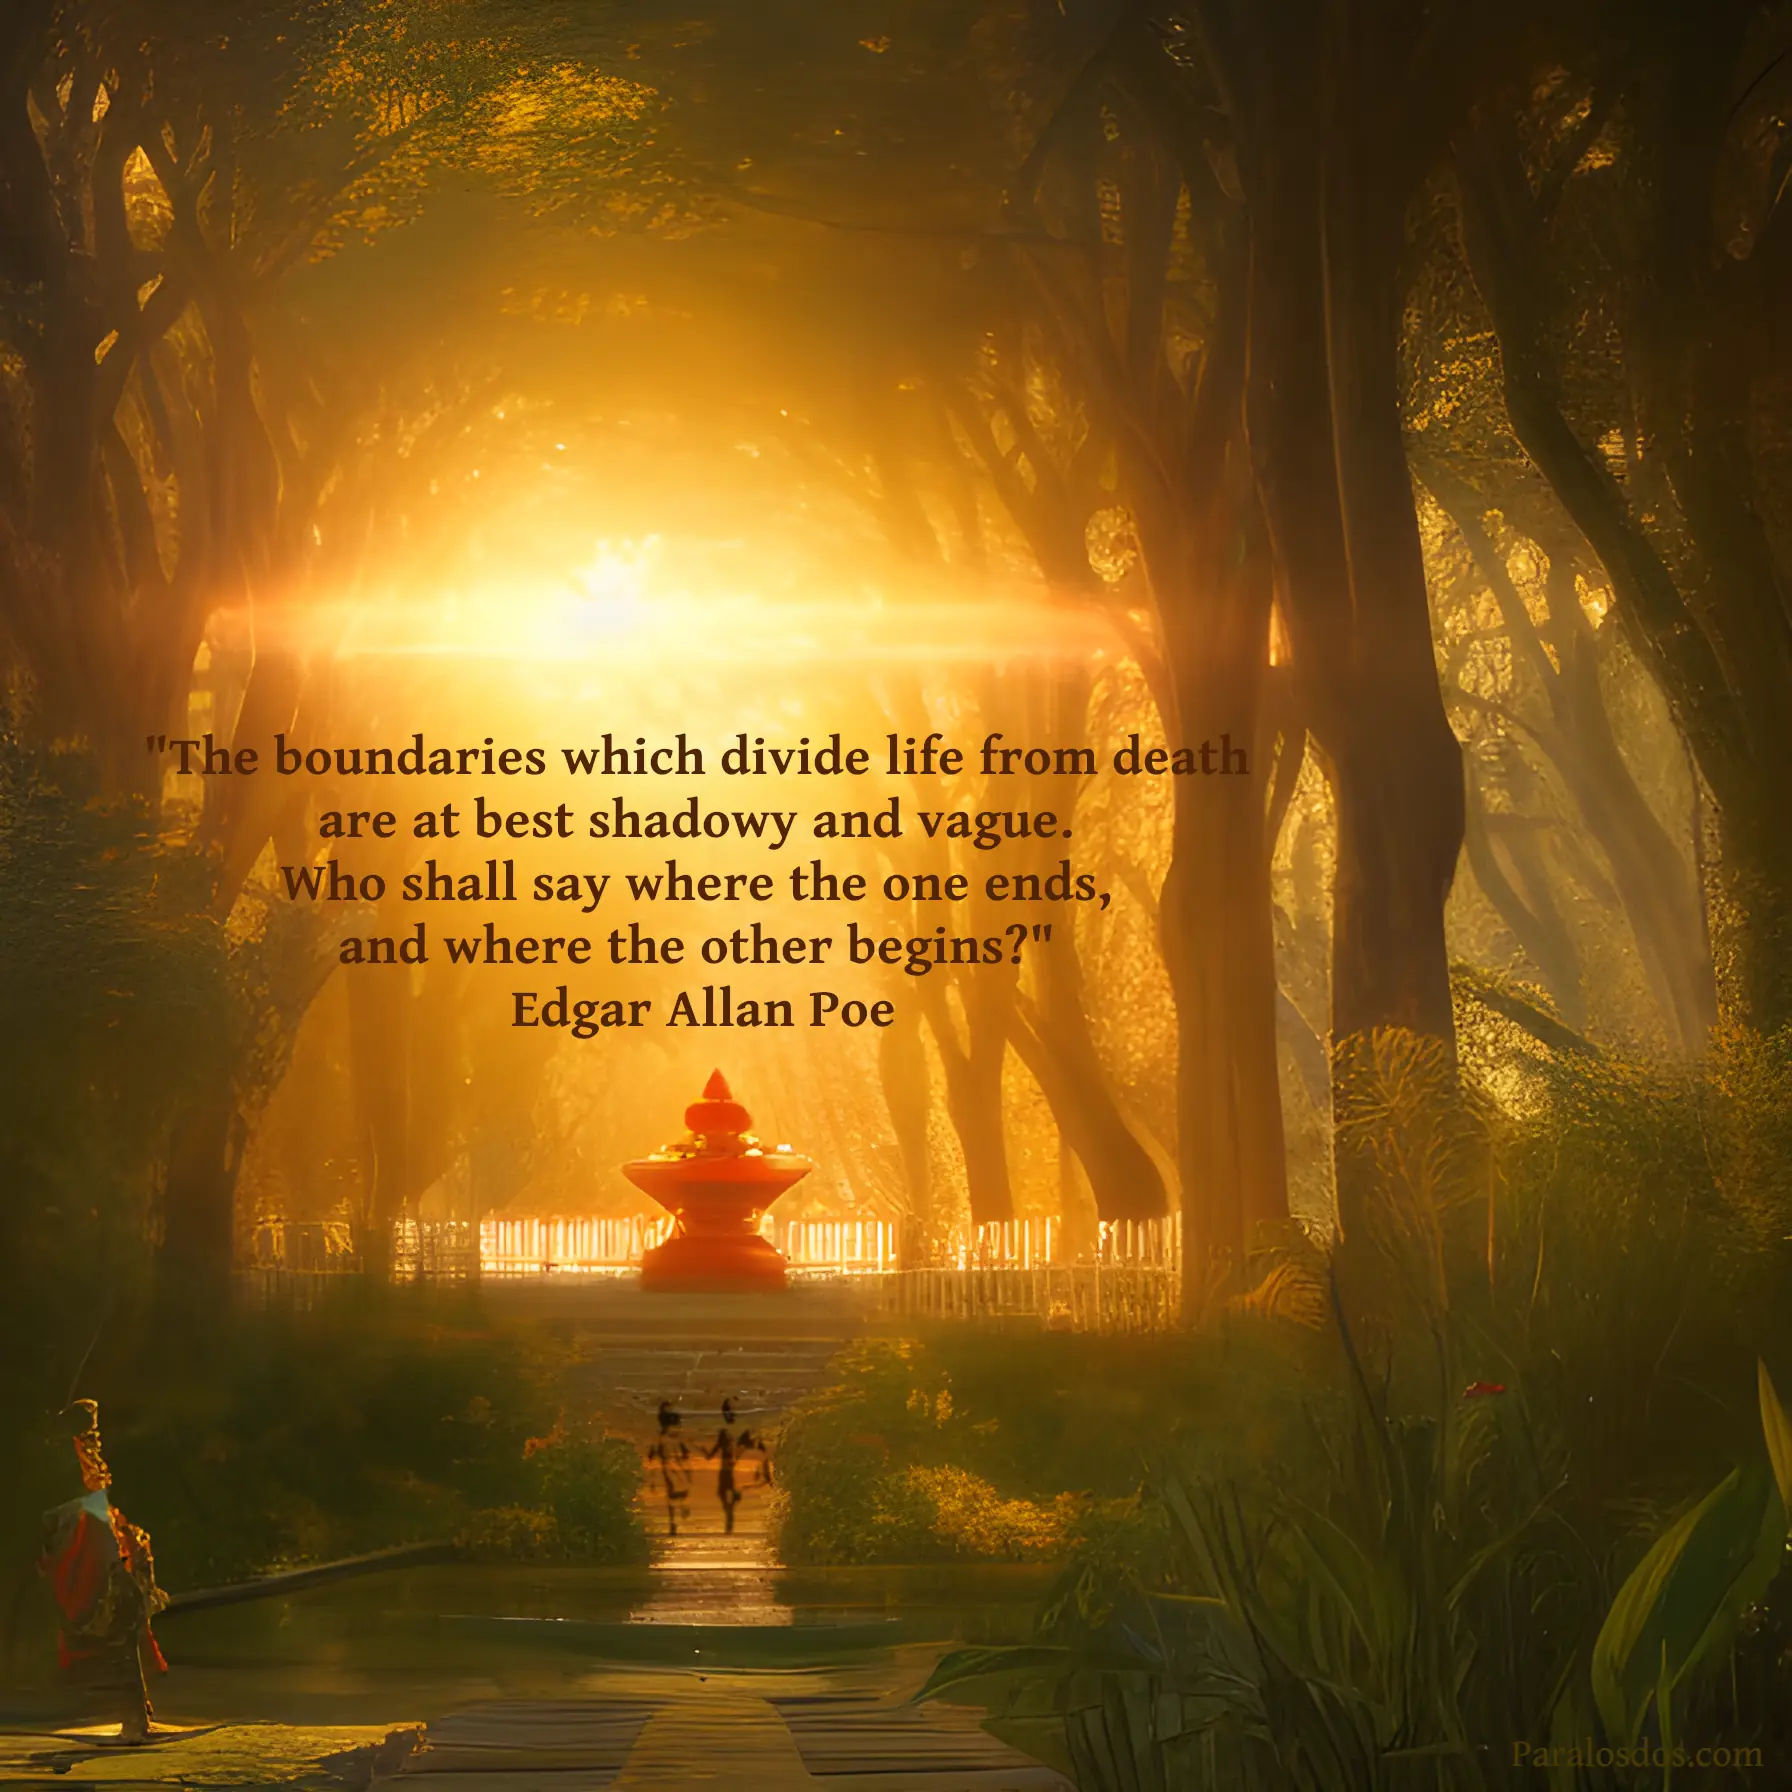 An artistic rendering of path leading to stairs and an object on a platform in a backlit, golden woods. The quote reads: "The boundaries which divide life from death are at best shadowy and vague. Who shall say where the one ends, and where the other begins?" Edgar Allan Poe